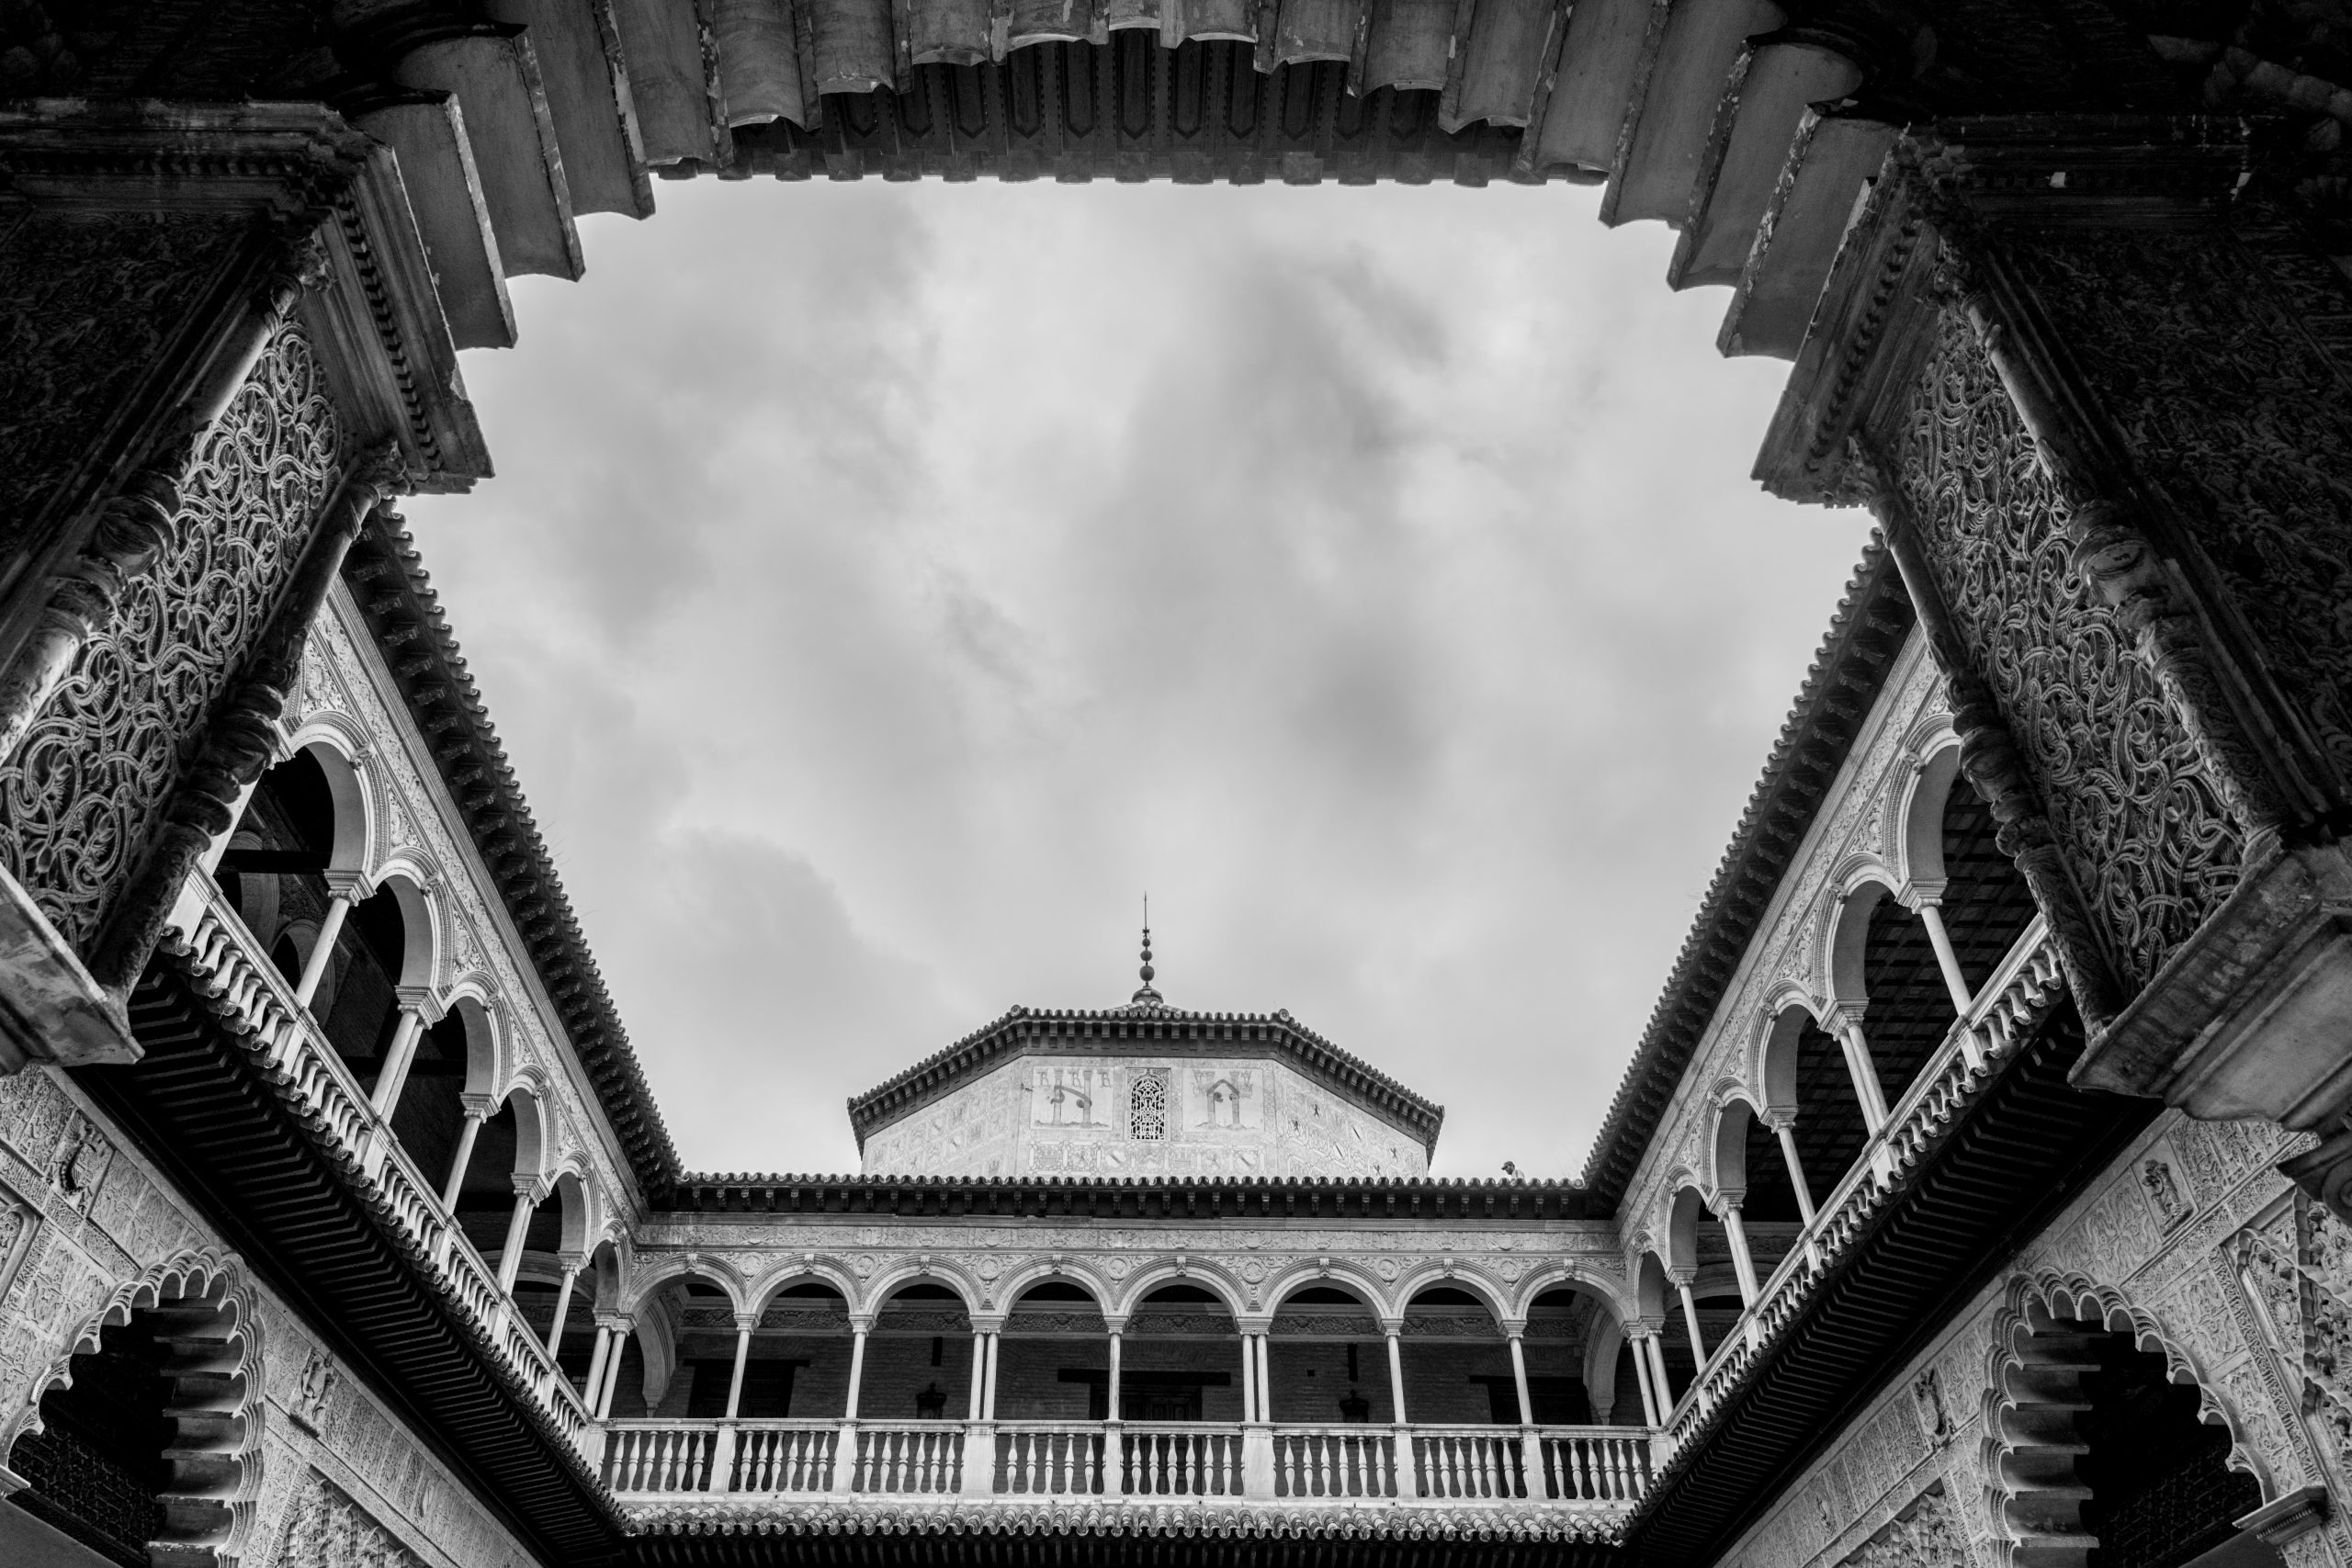 Black and white photograph of an open courtyard looking up inside the Alcazar of Seville.